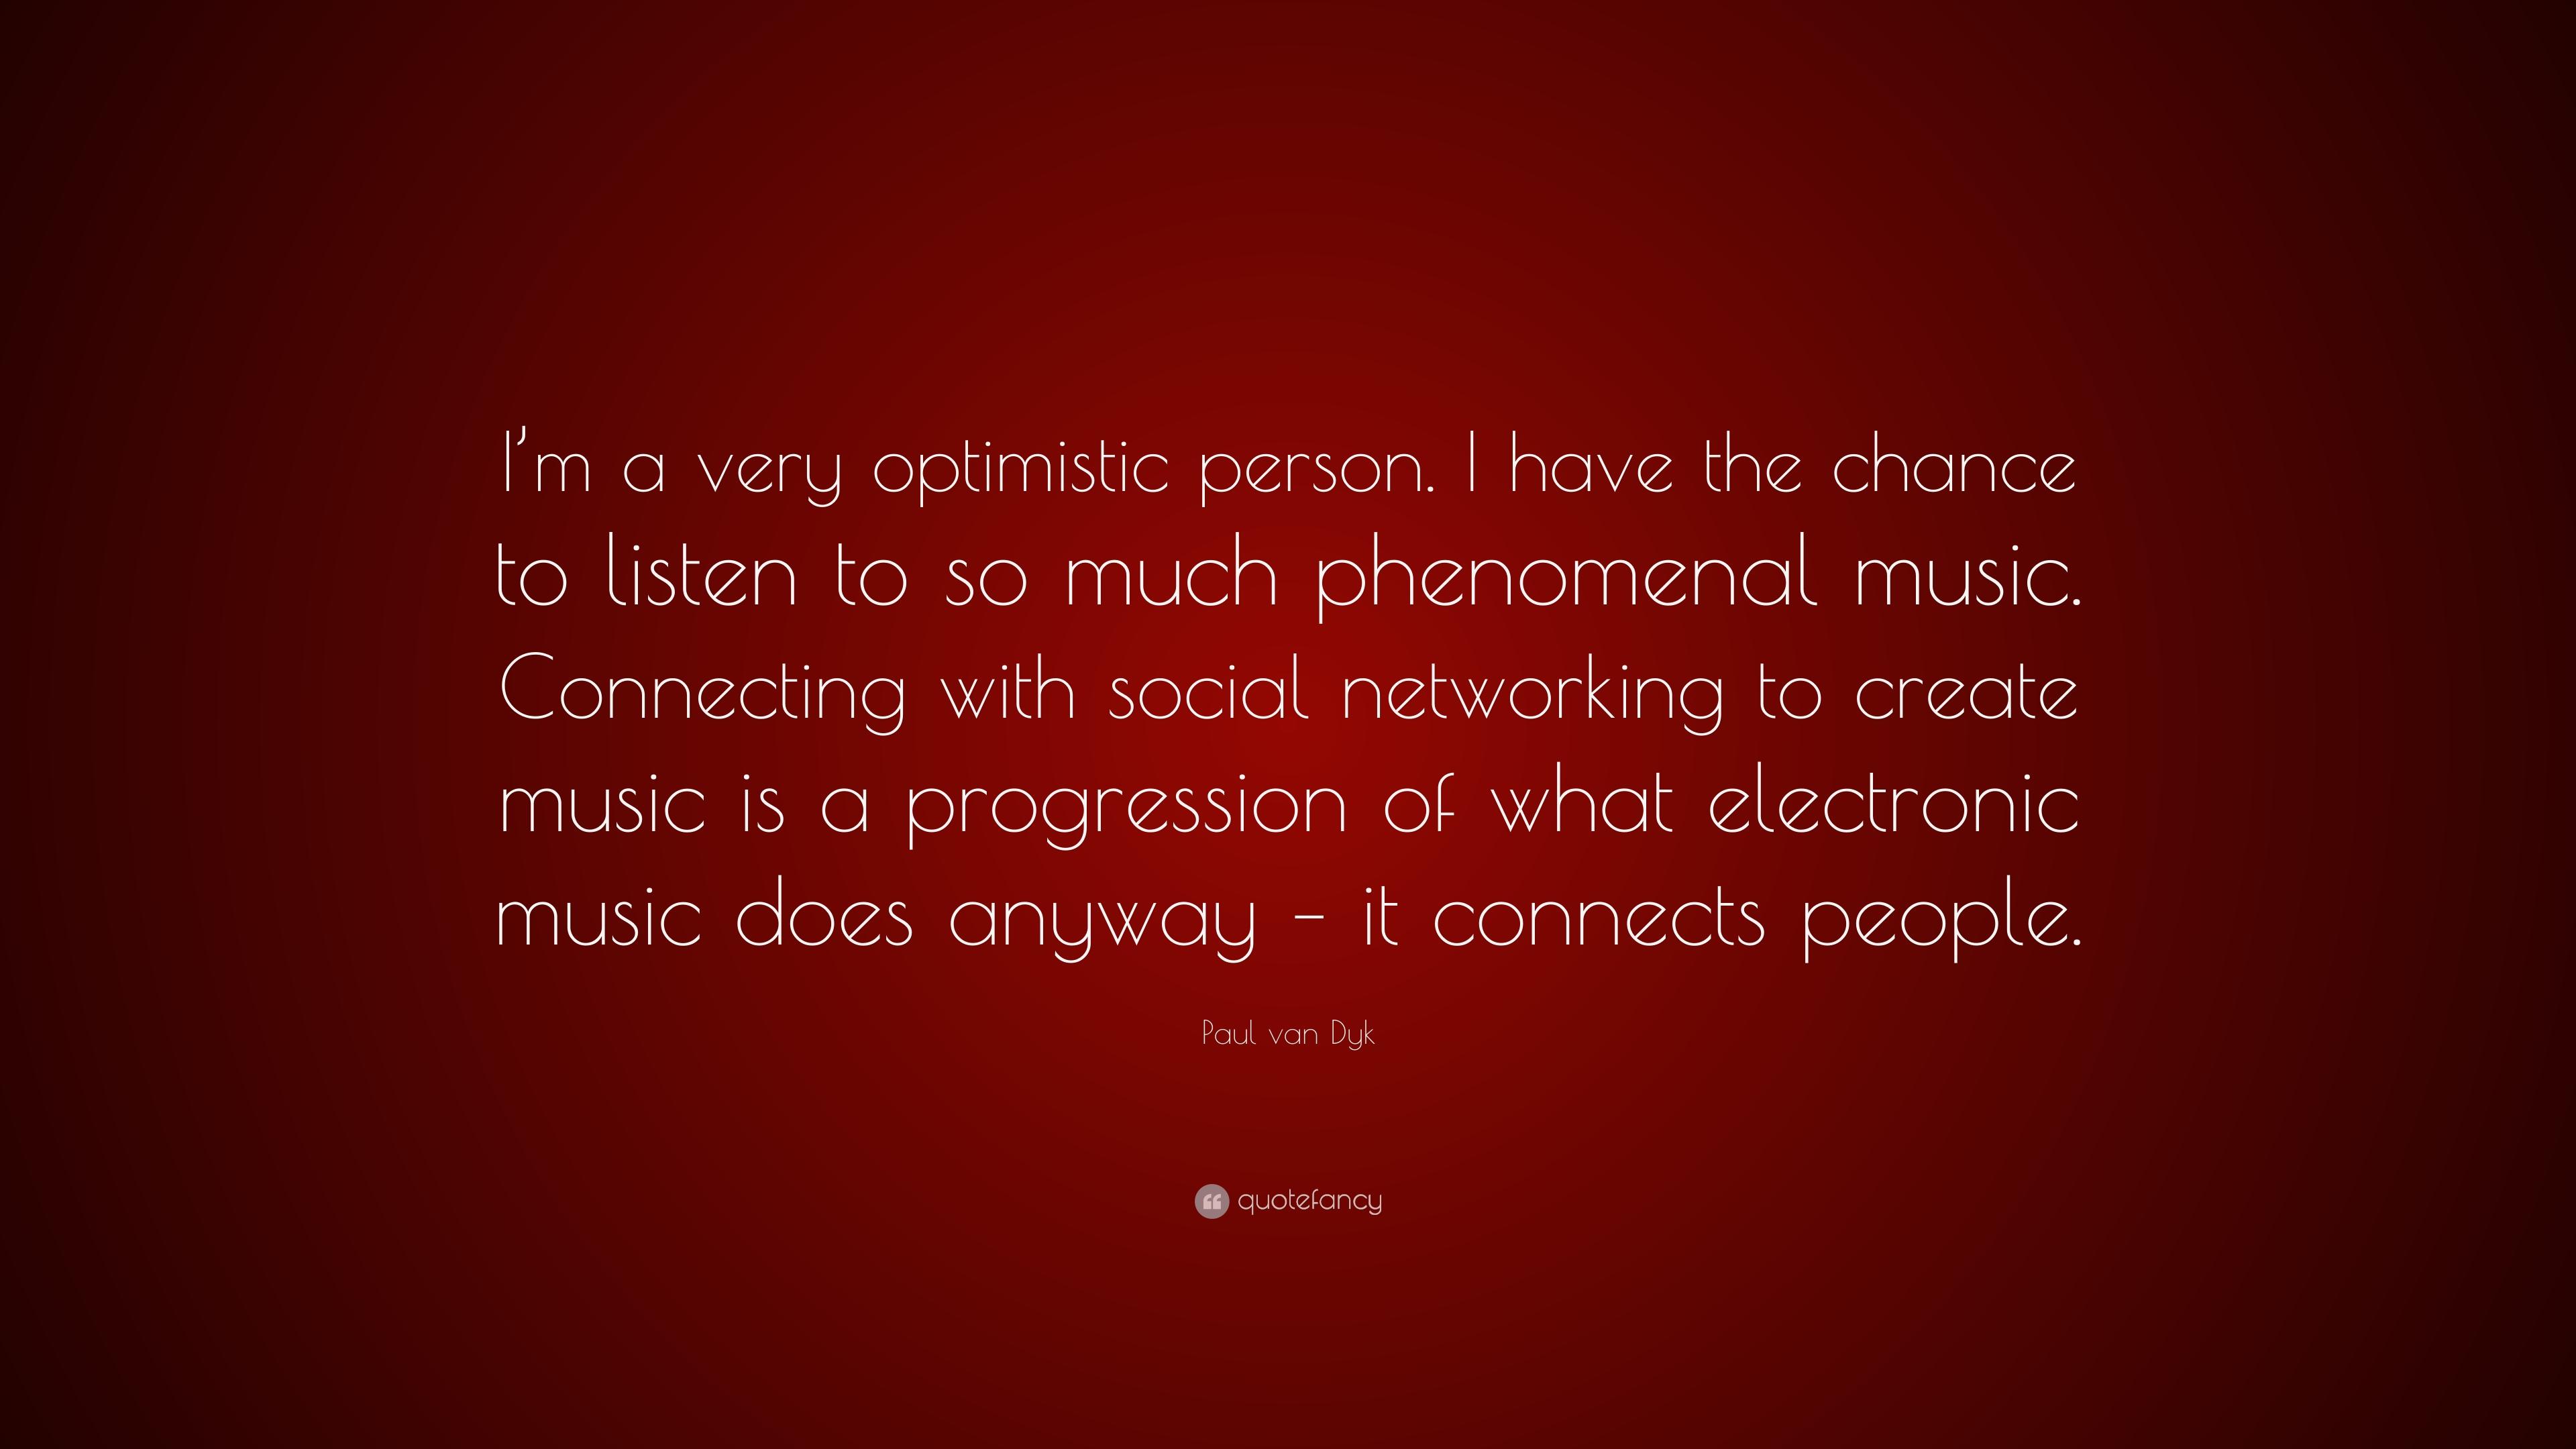 Paul van Dyk Quote: “I'm a very optimistic person. I have the chance